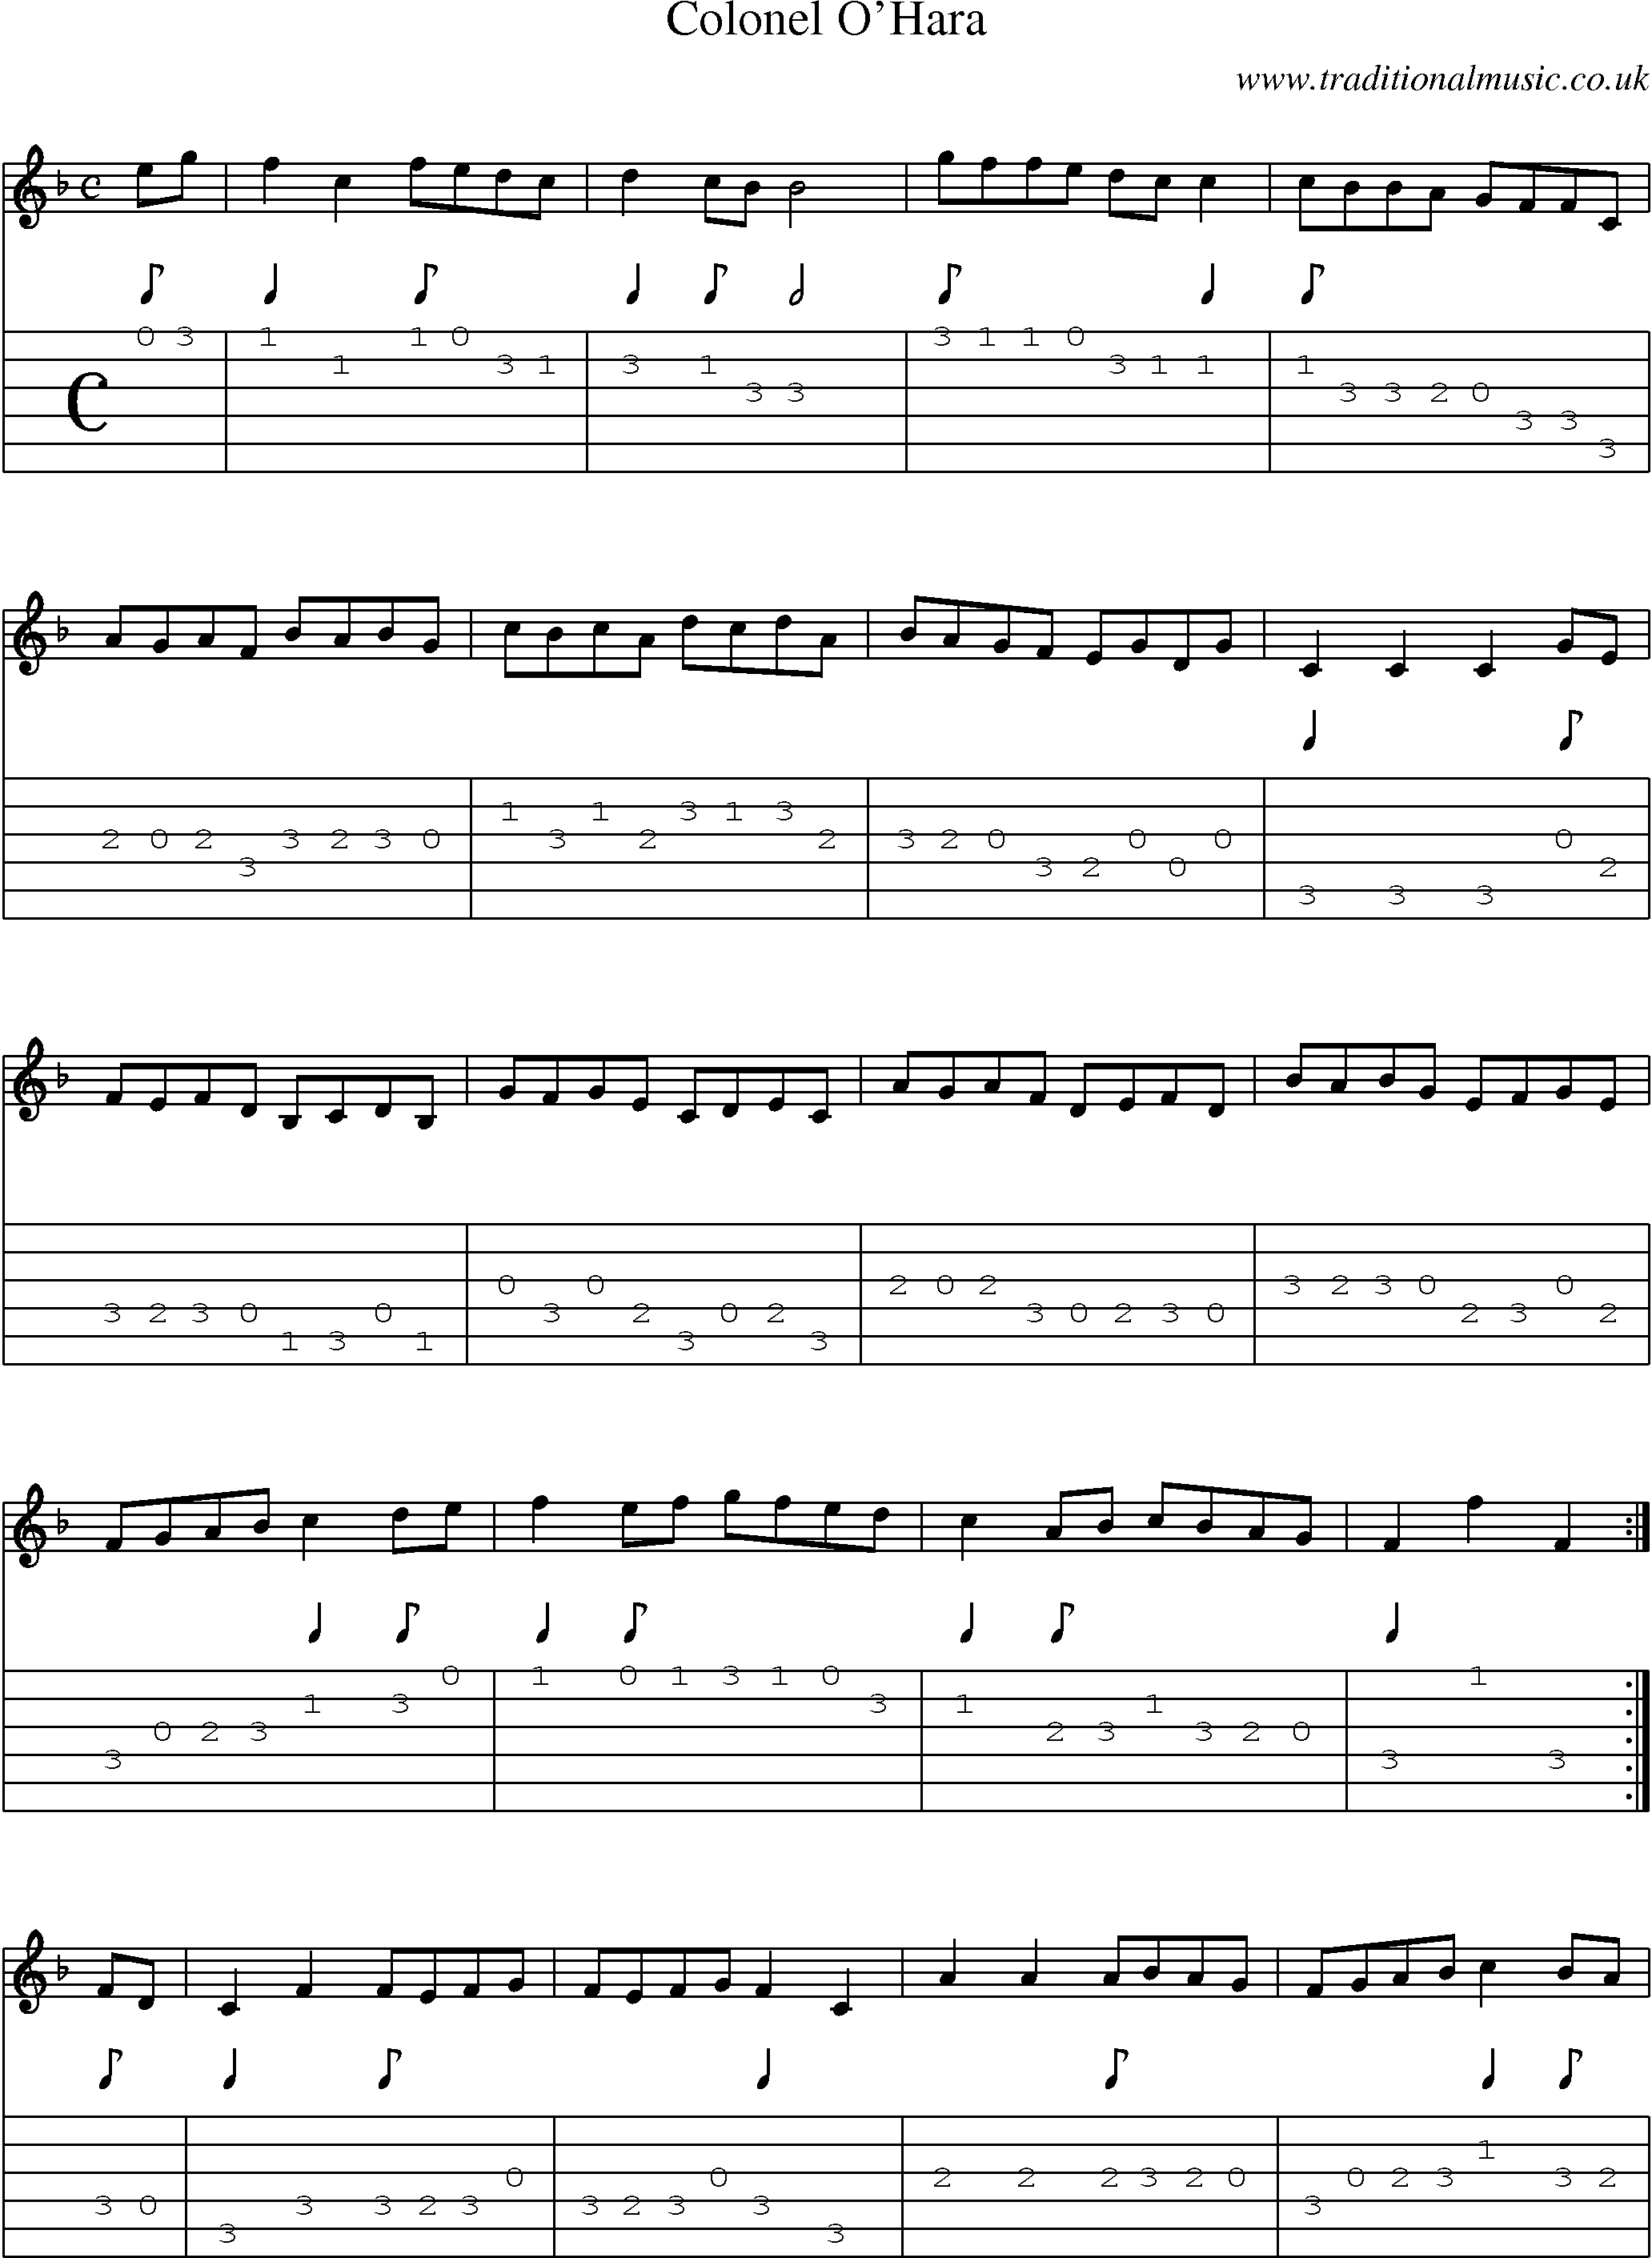 Music Score and Guitar Tabs for Colonel Ohara